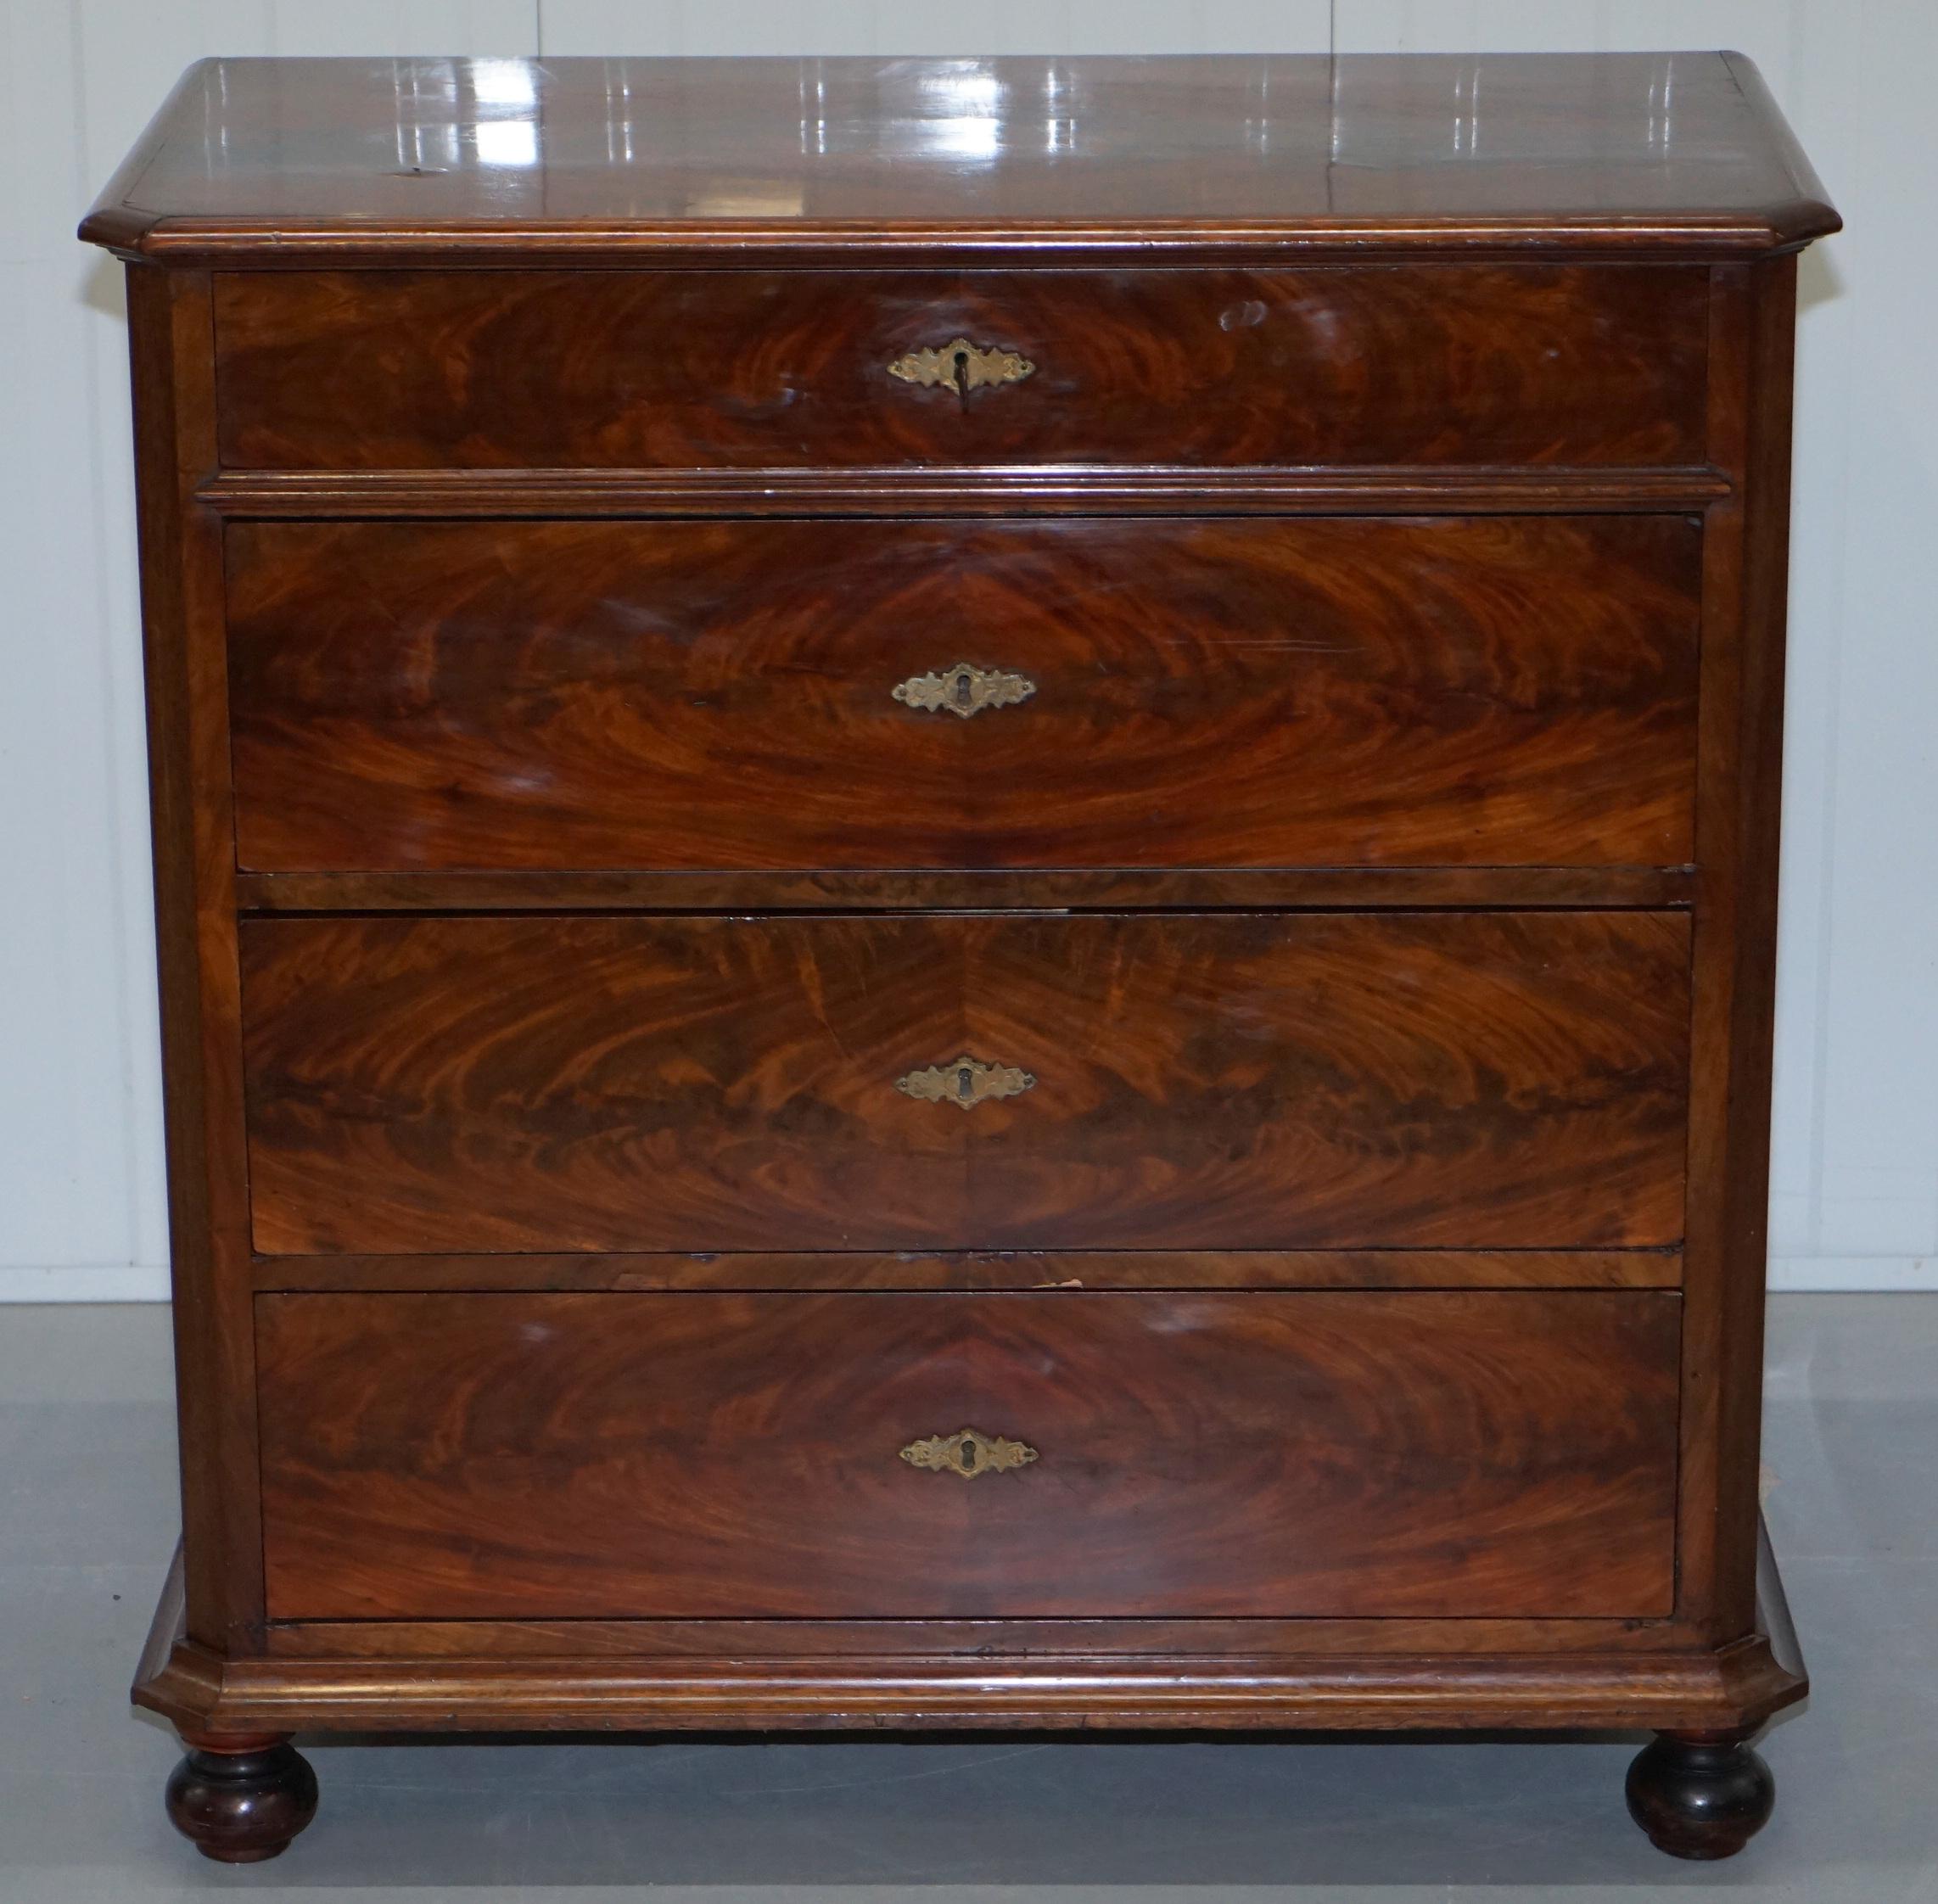 We are delighted to offer for sale this lovely circa 1820 flamed mahogany Biedermeier chest of drawers

A good looking and well-made chest with a rich warm patina to the timber, the one key which is original operates all locks, these types of